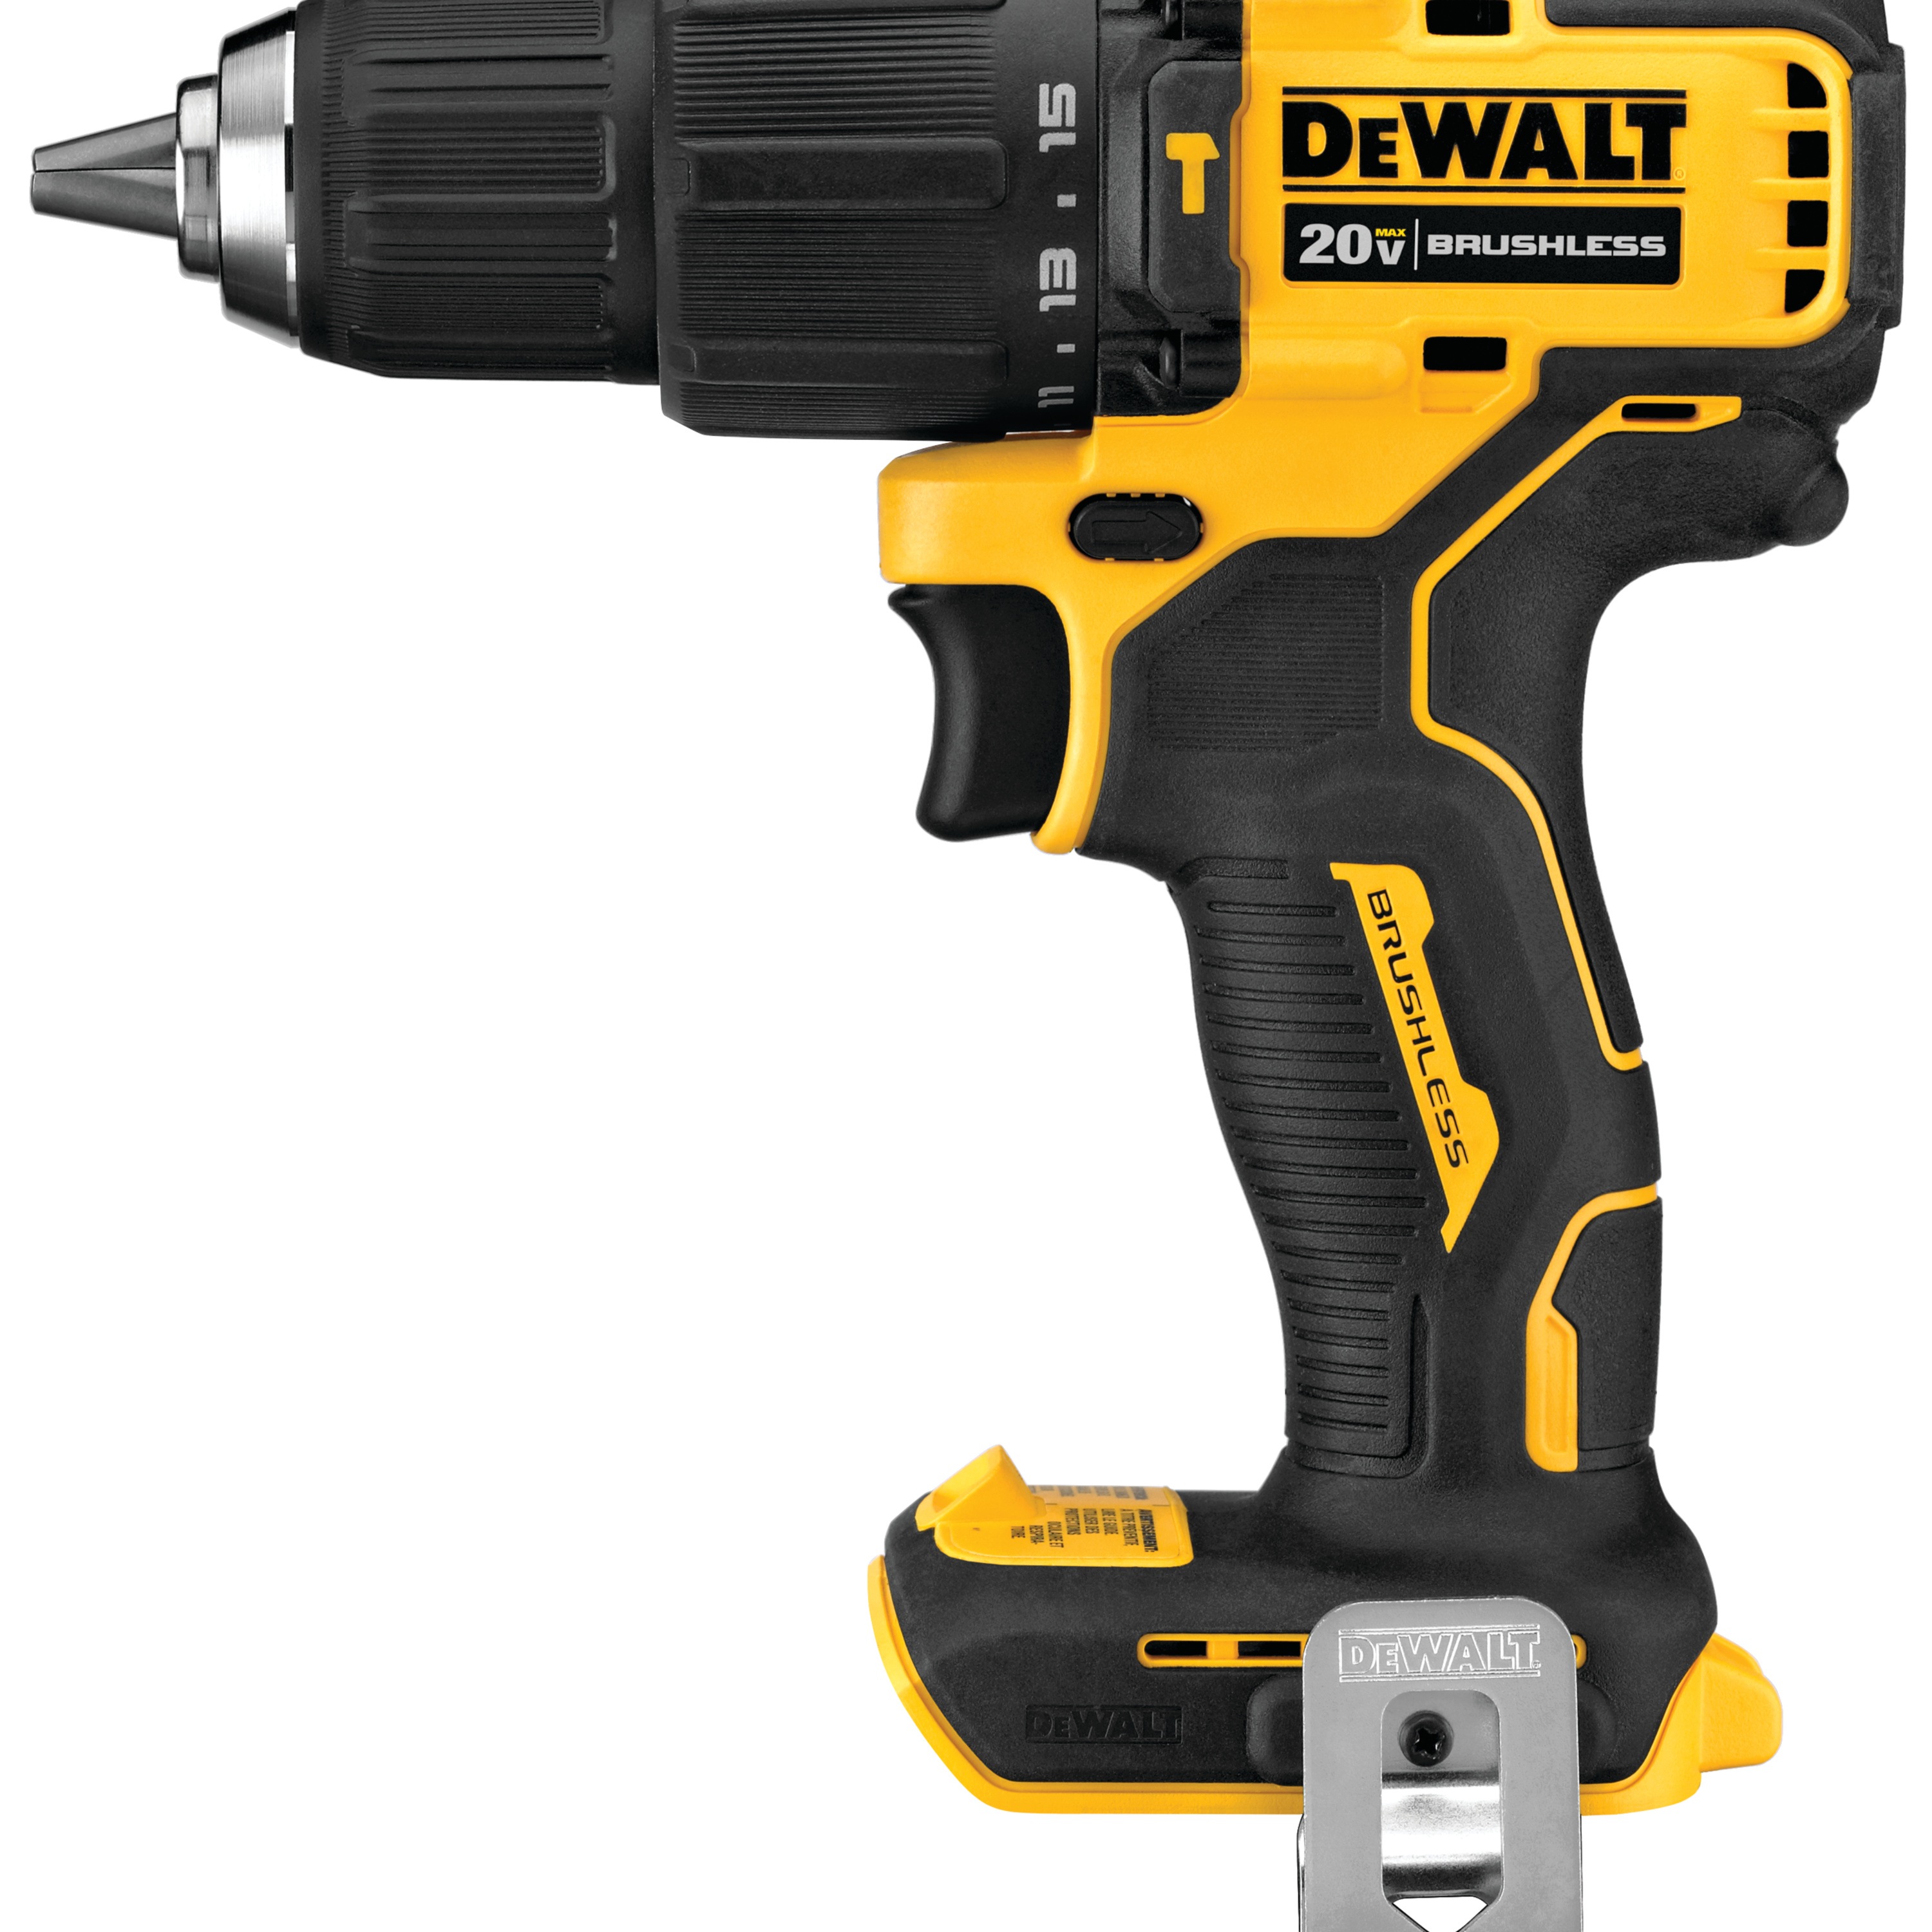 Profile of Atomic cordless compact half inch hammer drill driver.